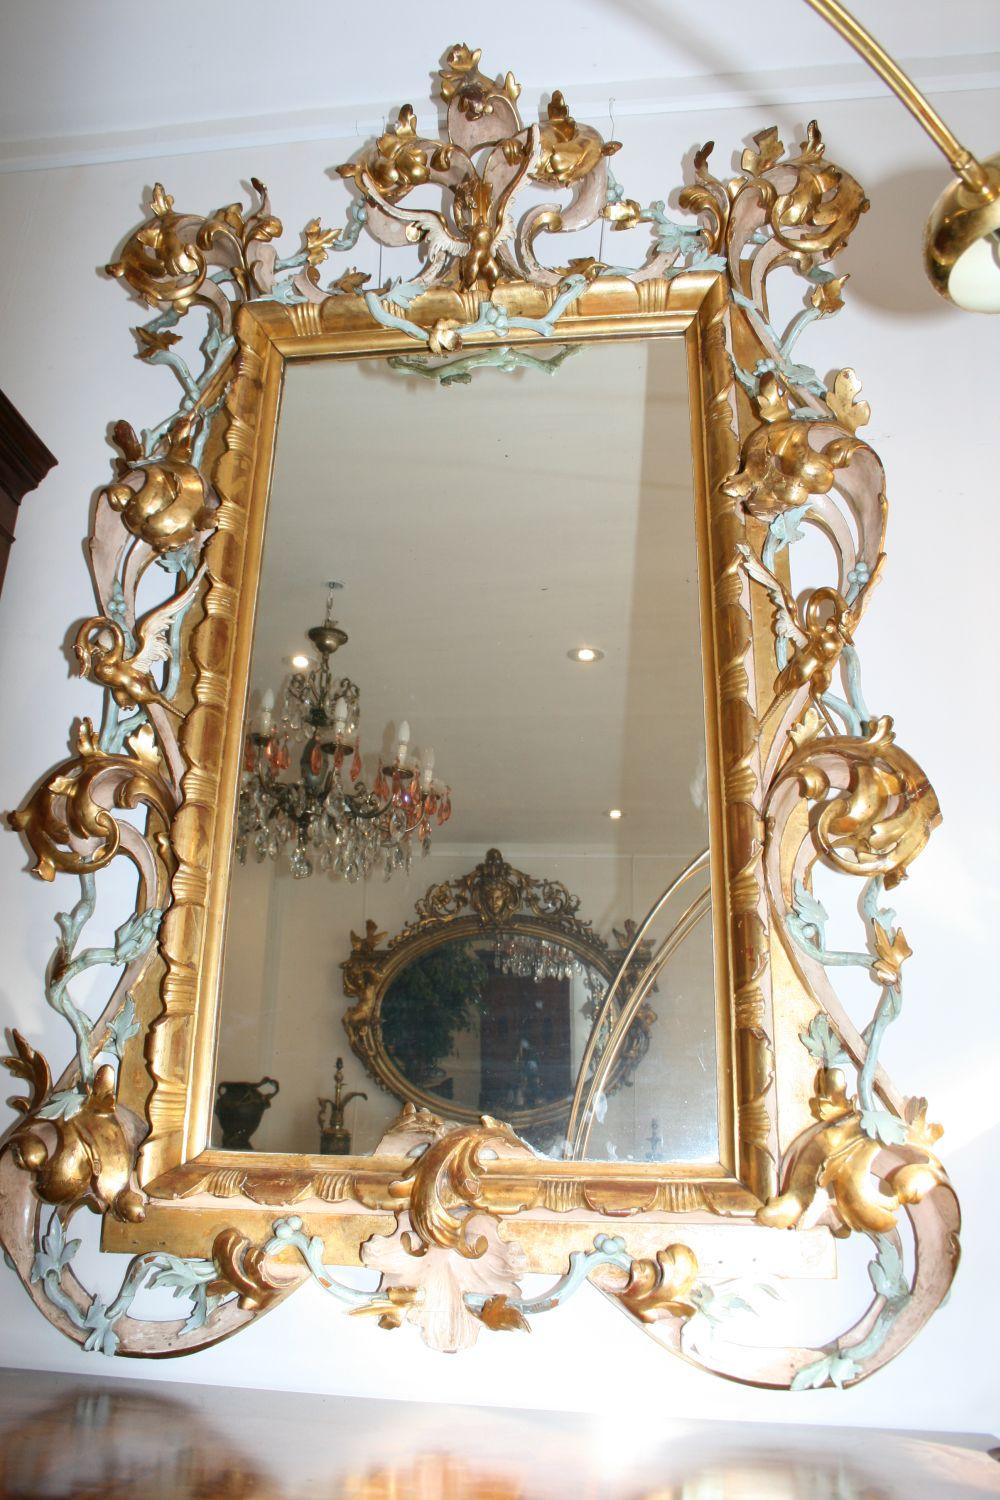 Very large & decorative antique giltwood mirror dating from the early 19th century & possibly older. We believe it’s Italian & very unusual in the way it’s not only gilt, but has light blue & cream finishes too. The frame is beautiful & has